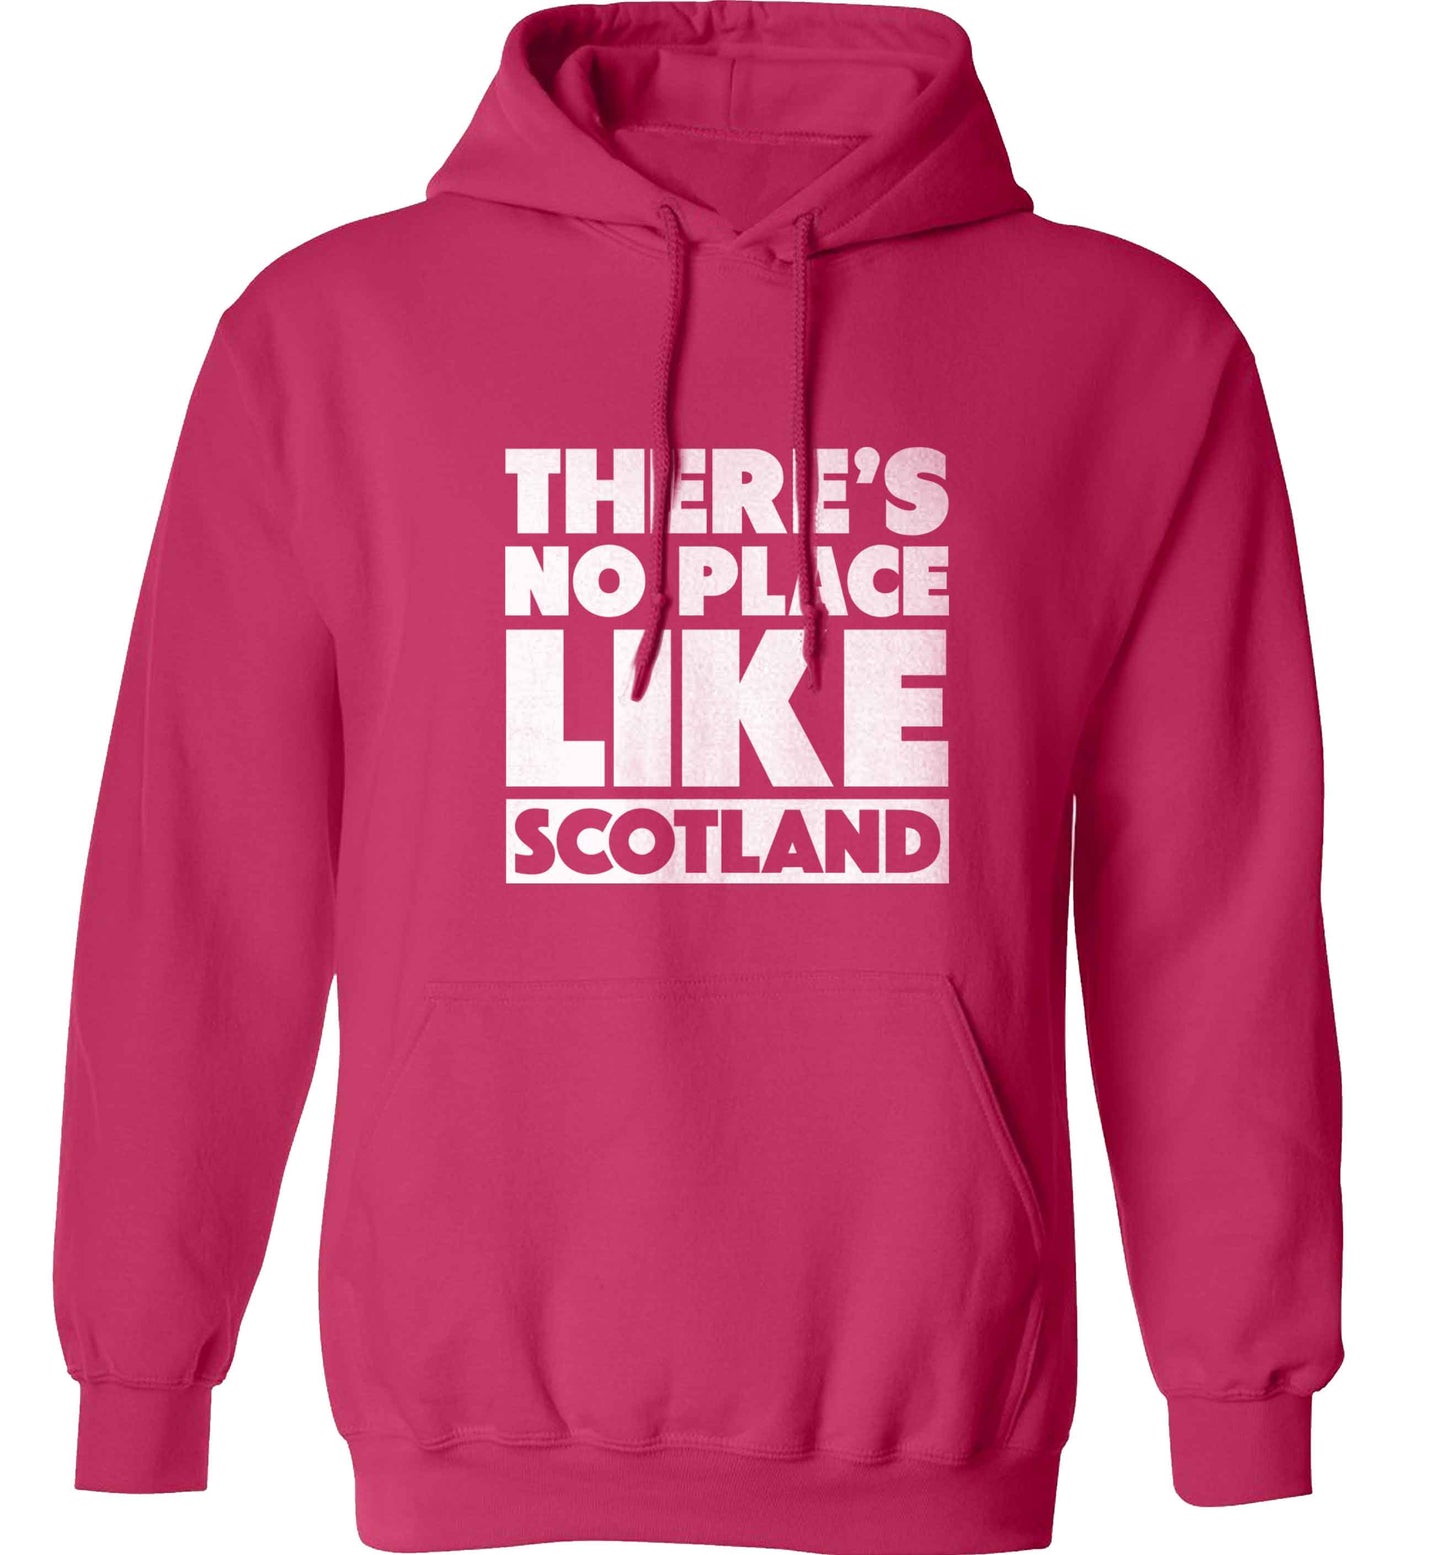 There's no place like Scotland adults unisex pink hoodie 2XL